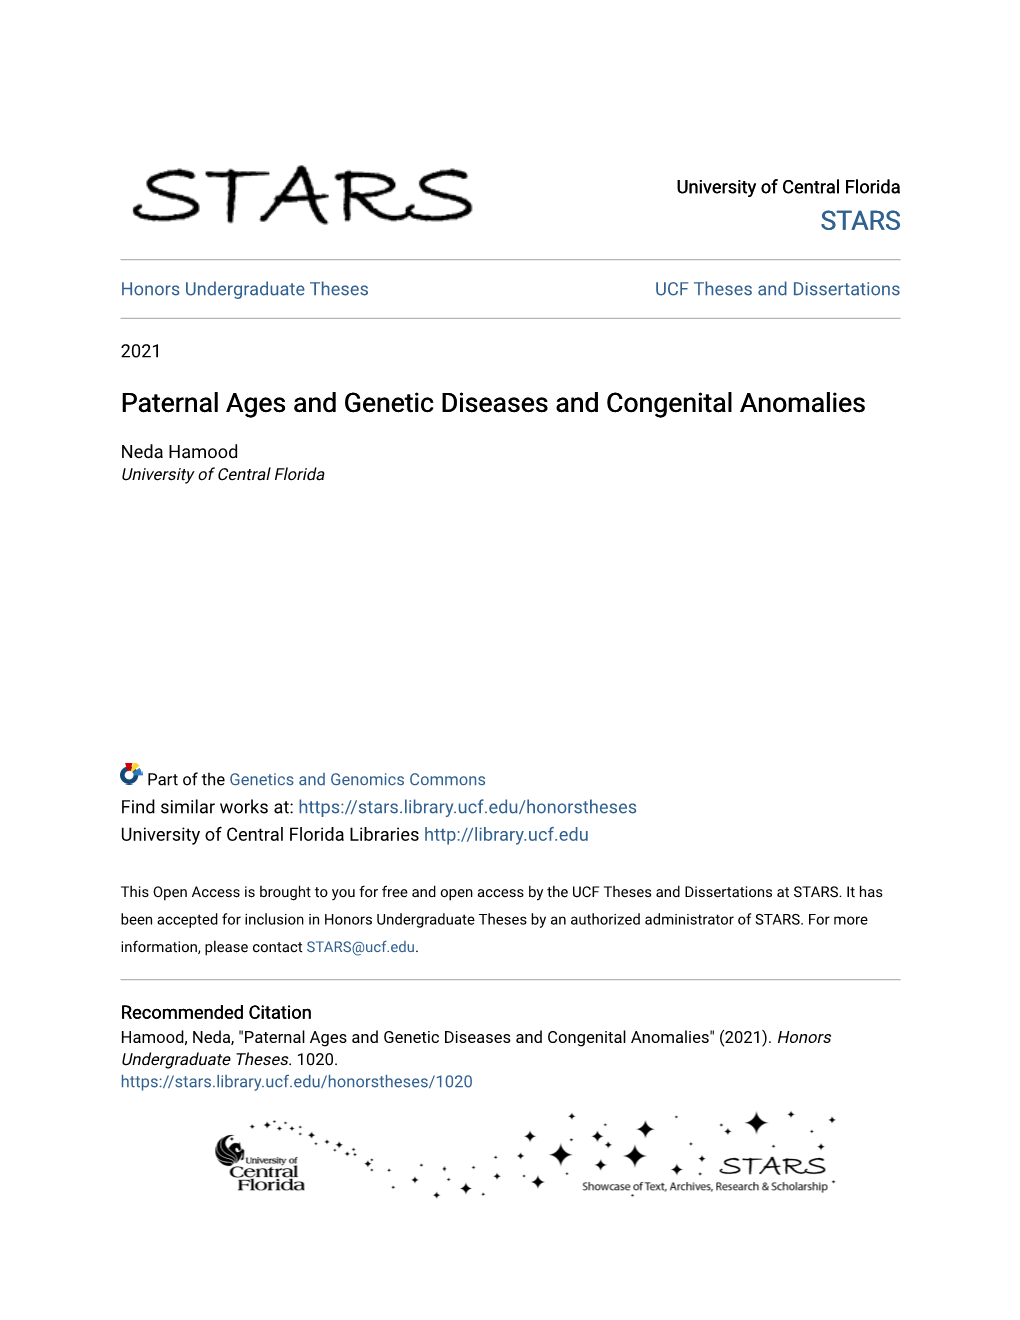 Paternal Ages and Genetic Diseases and Congenital Anomalies